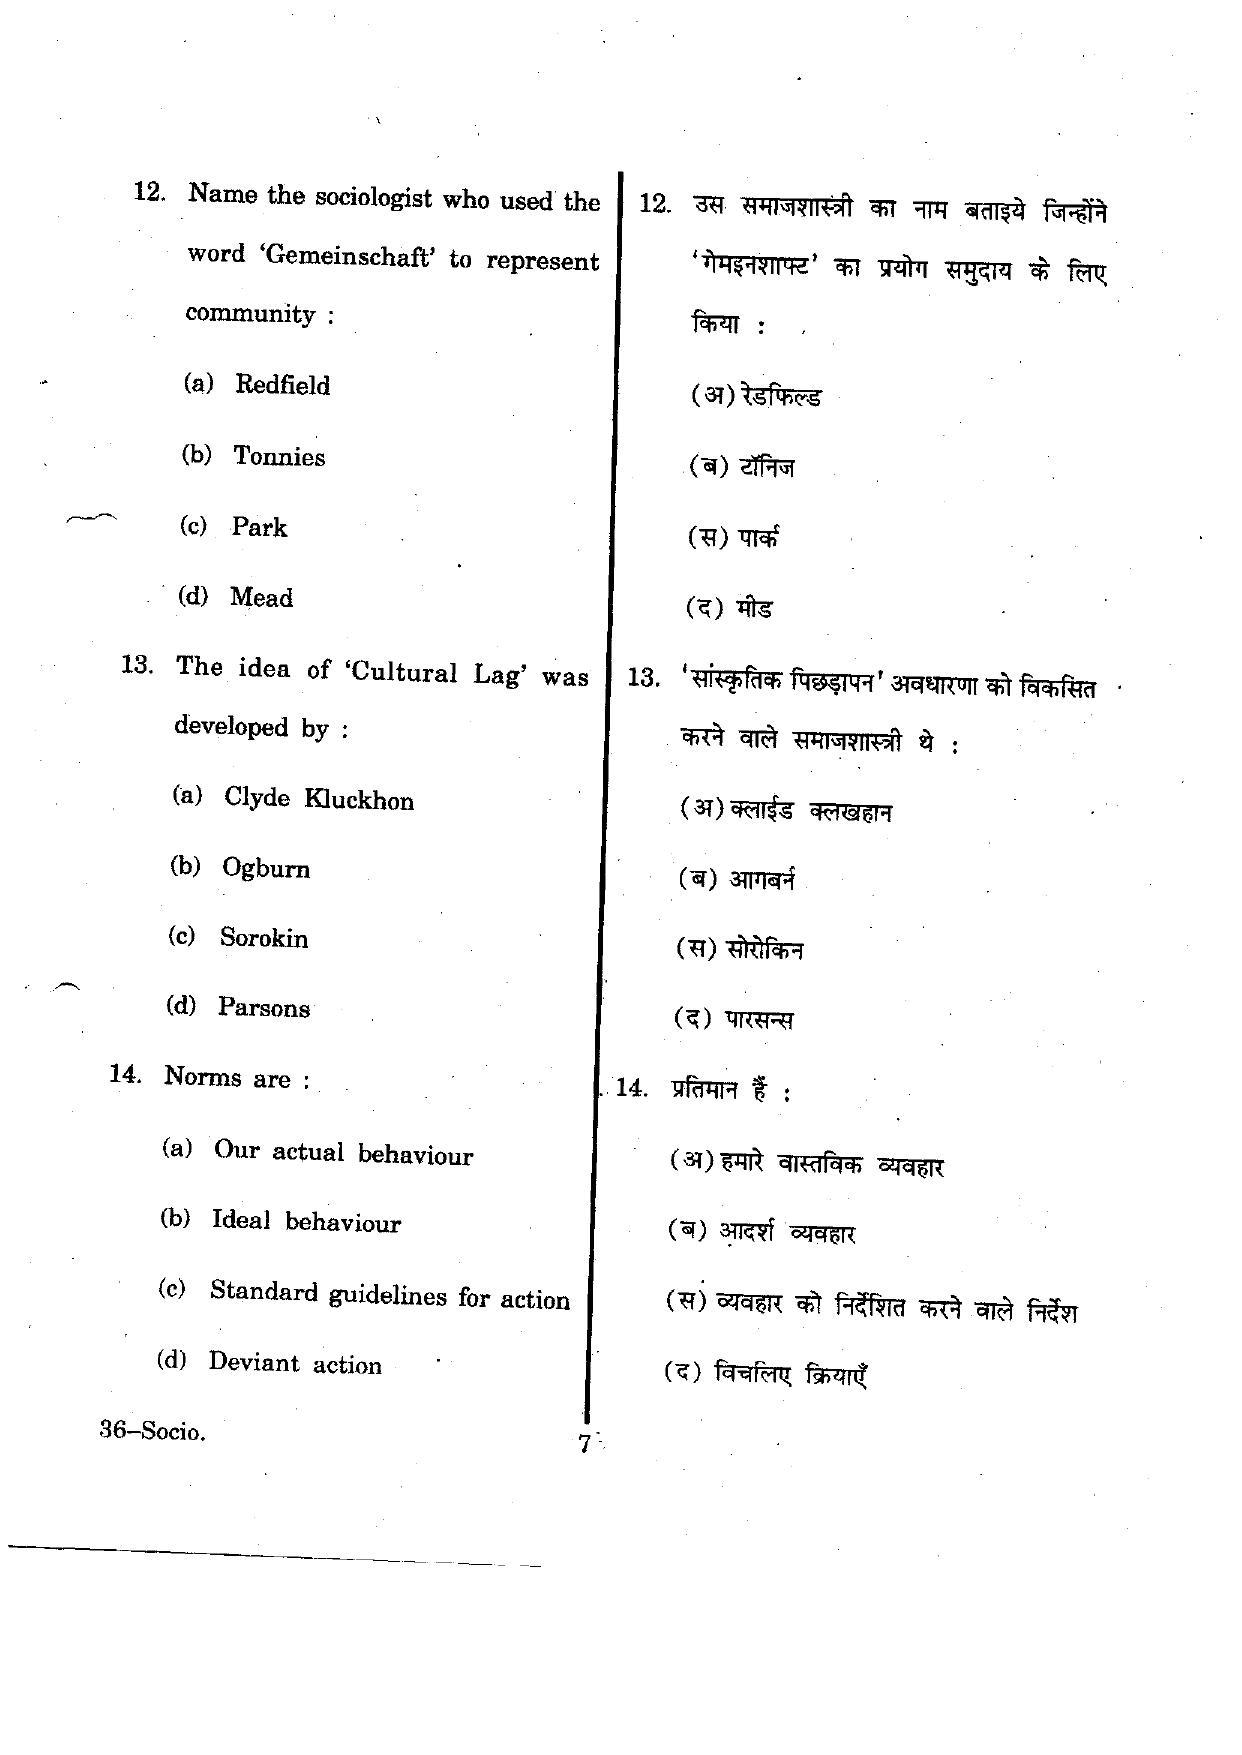 URATPG Sociology 2012 Question Paper - Page 7